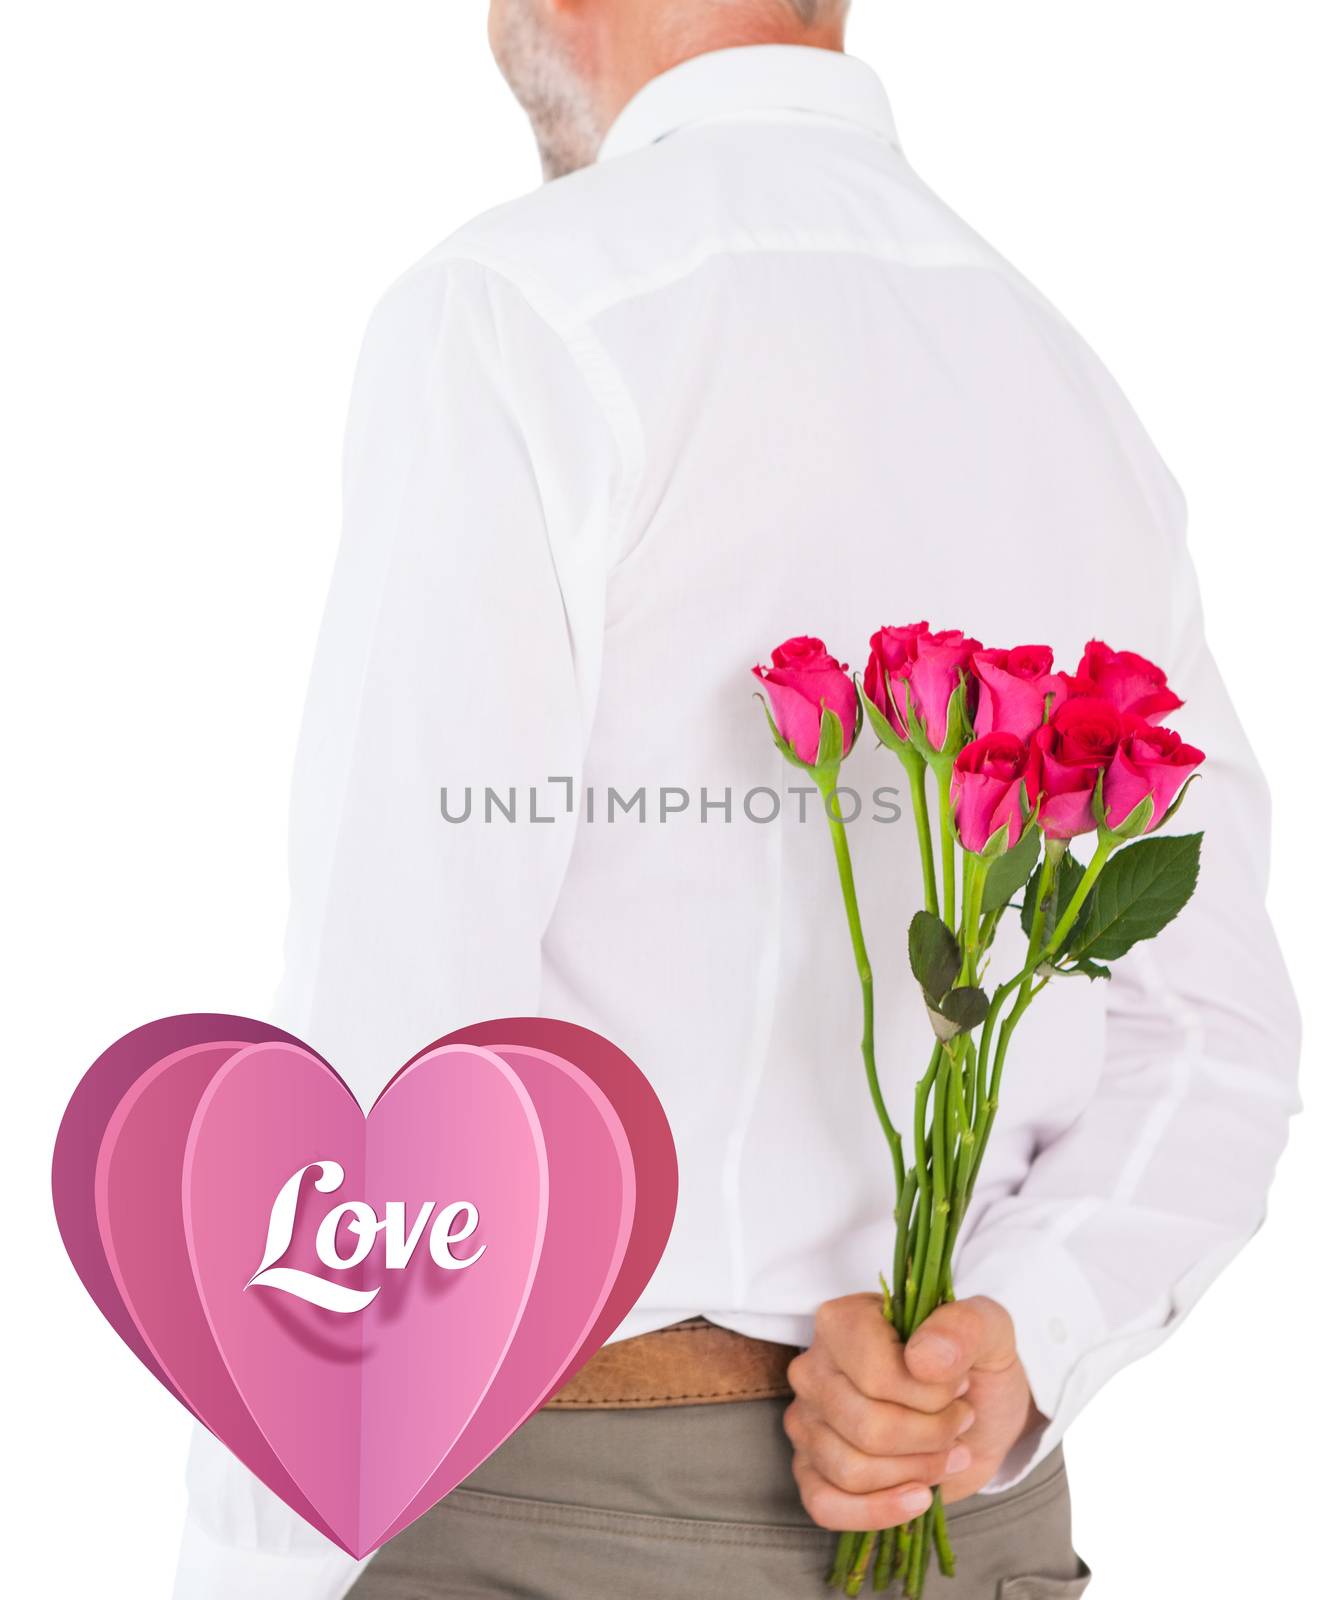 Man holding bouquet of roses behind back against love heart